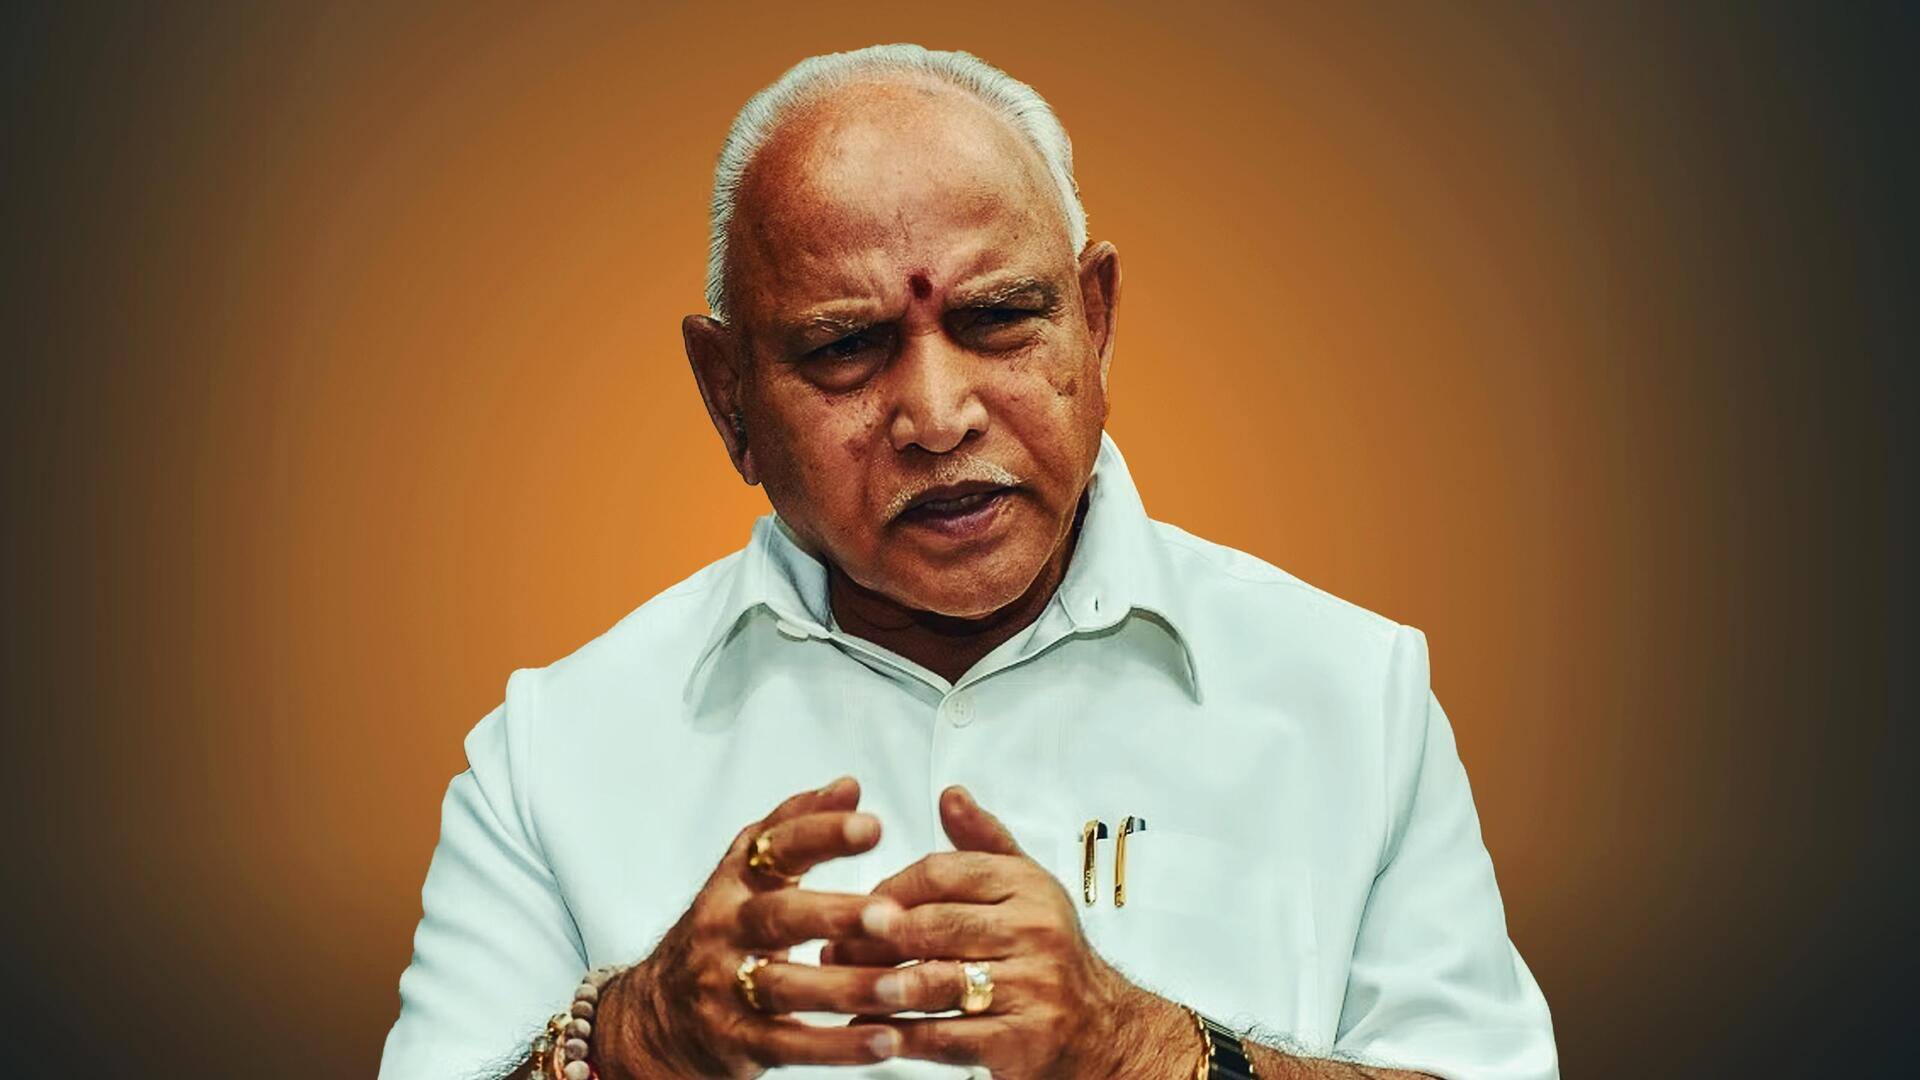 Yediyurappa booked for sexually assaulting minor; former CM denies allegation 